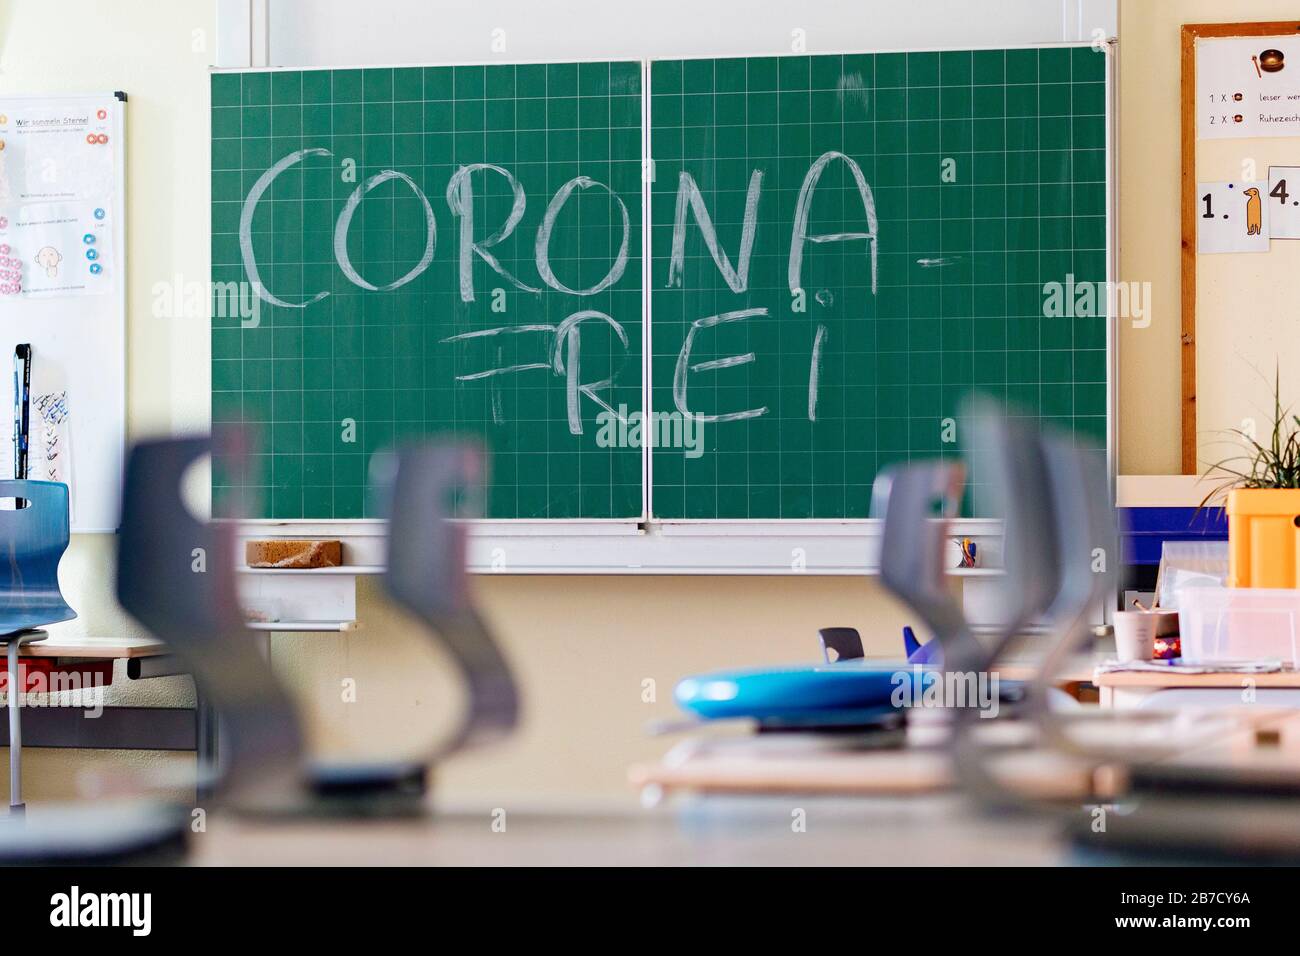 Corona-free at a school in Südstadt Cologne (Germany) Stock Photo